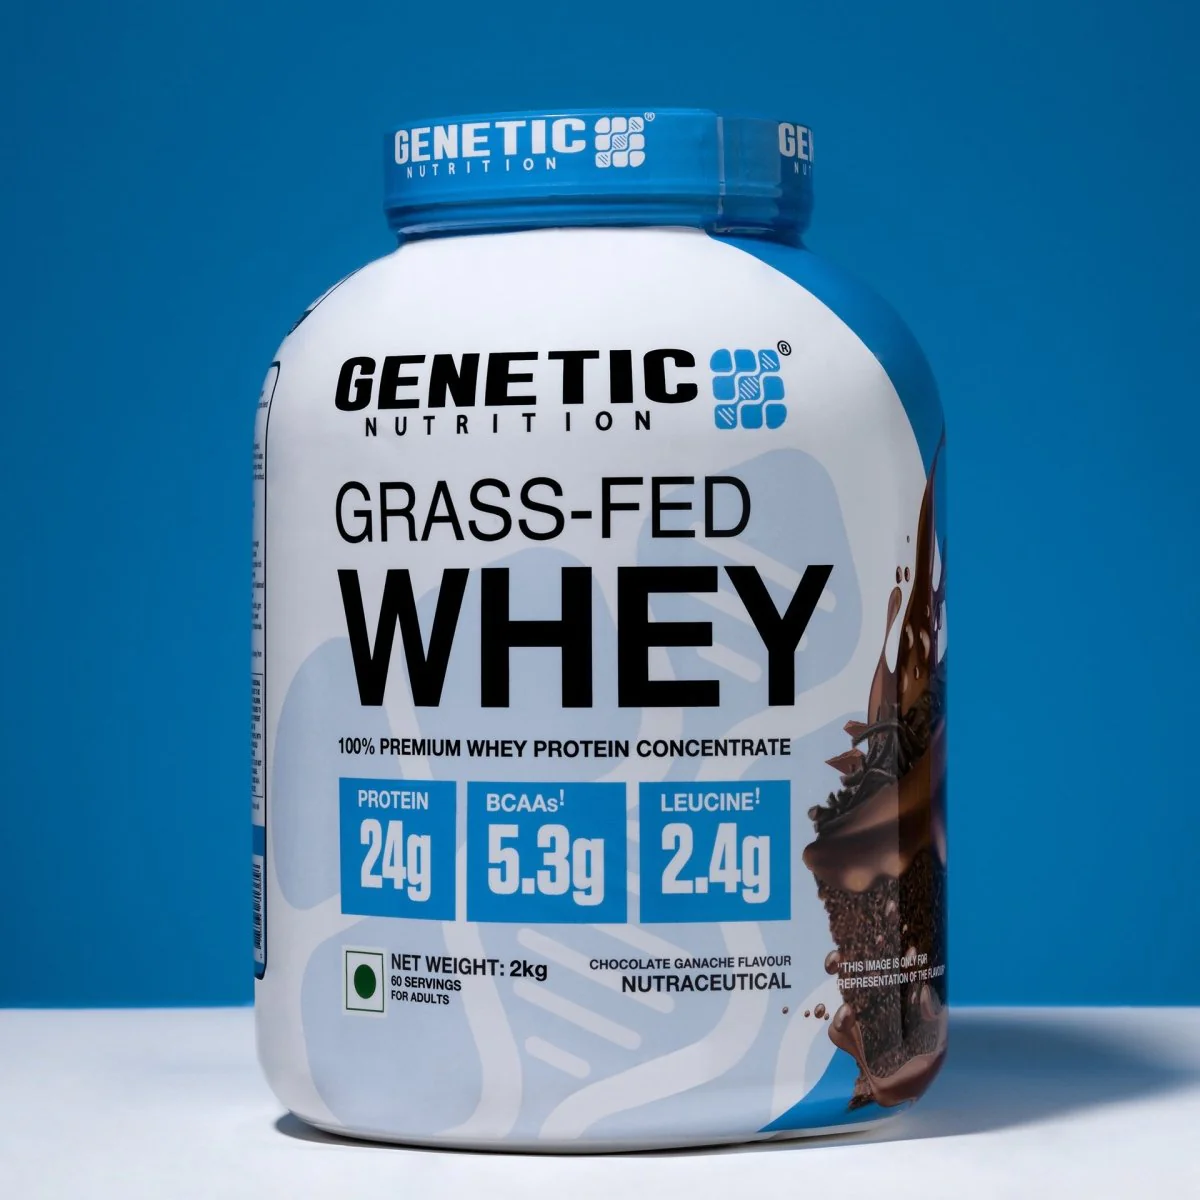 Genetic Nutrition Grass-Fed Whey | Whey Protein Concentrate Powder